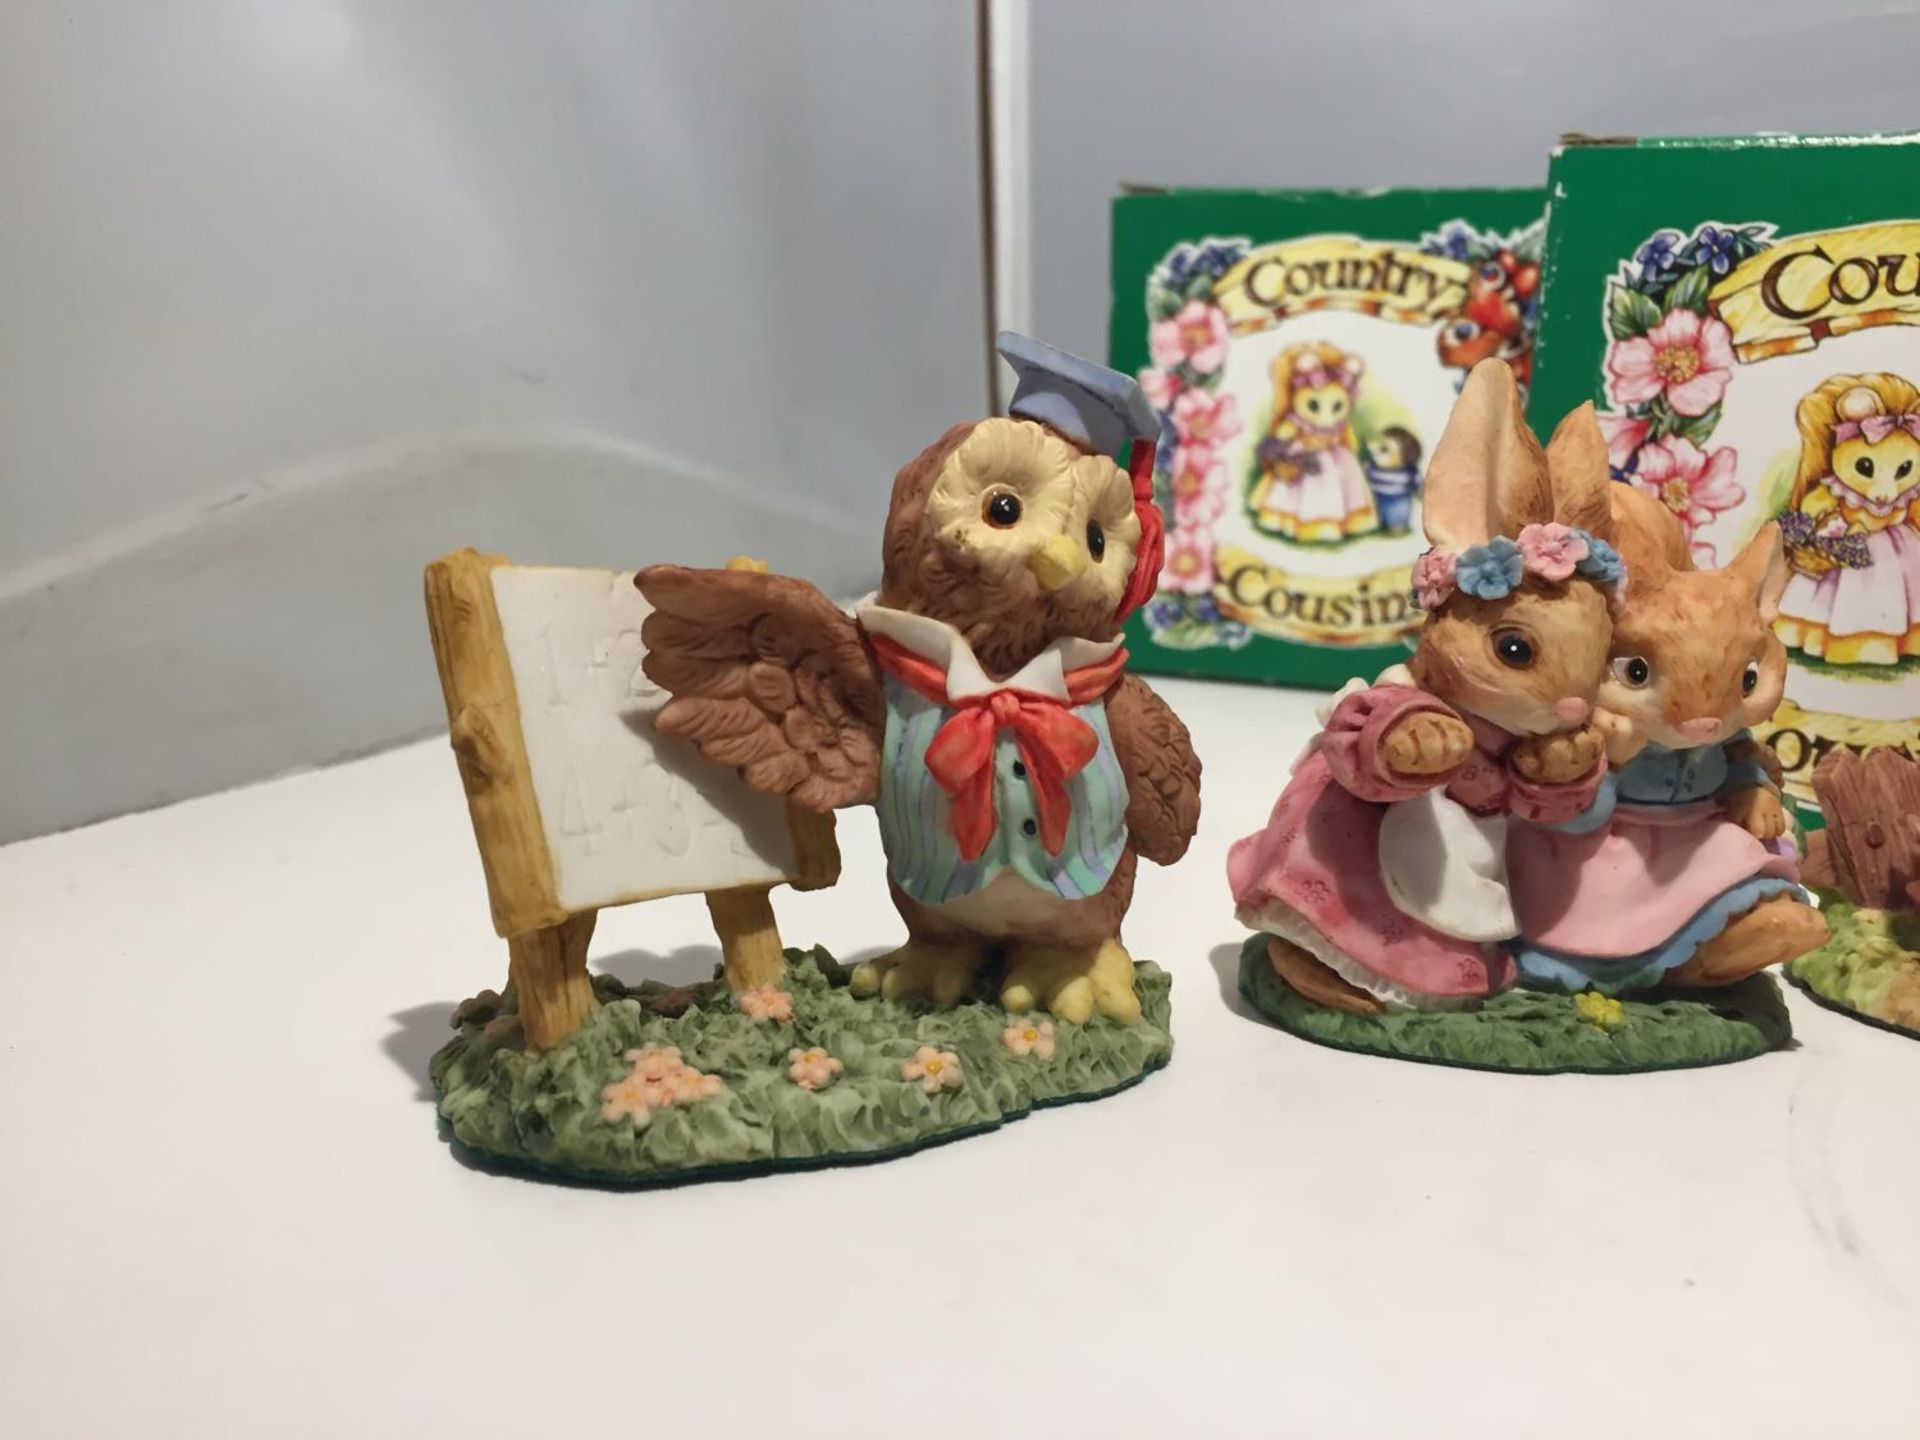 SIX BESWICK COUNTRY COUSINS FIGURES WITH BOXES - Image 2 of 4